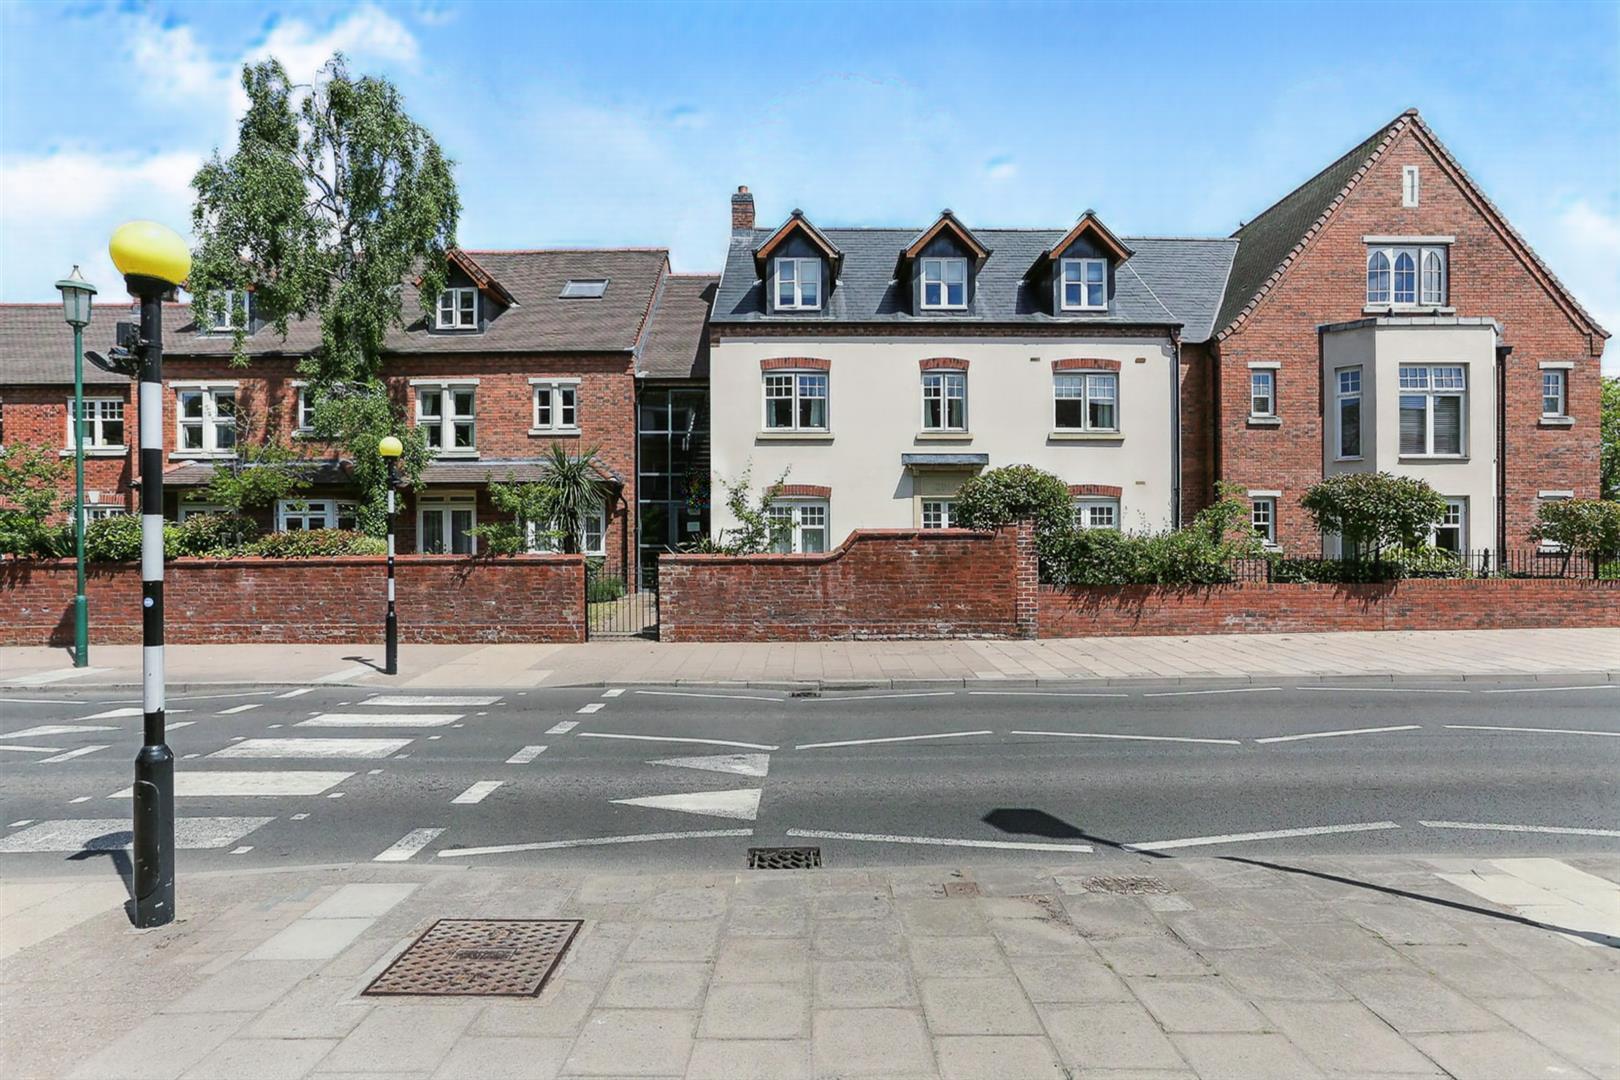 Arden Grange, 1649 High Street, Knowle, Solihull, B93 0LL